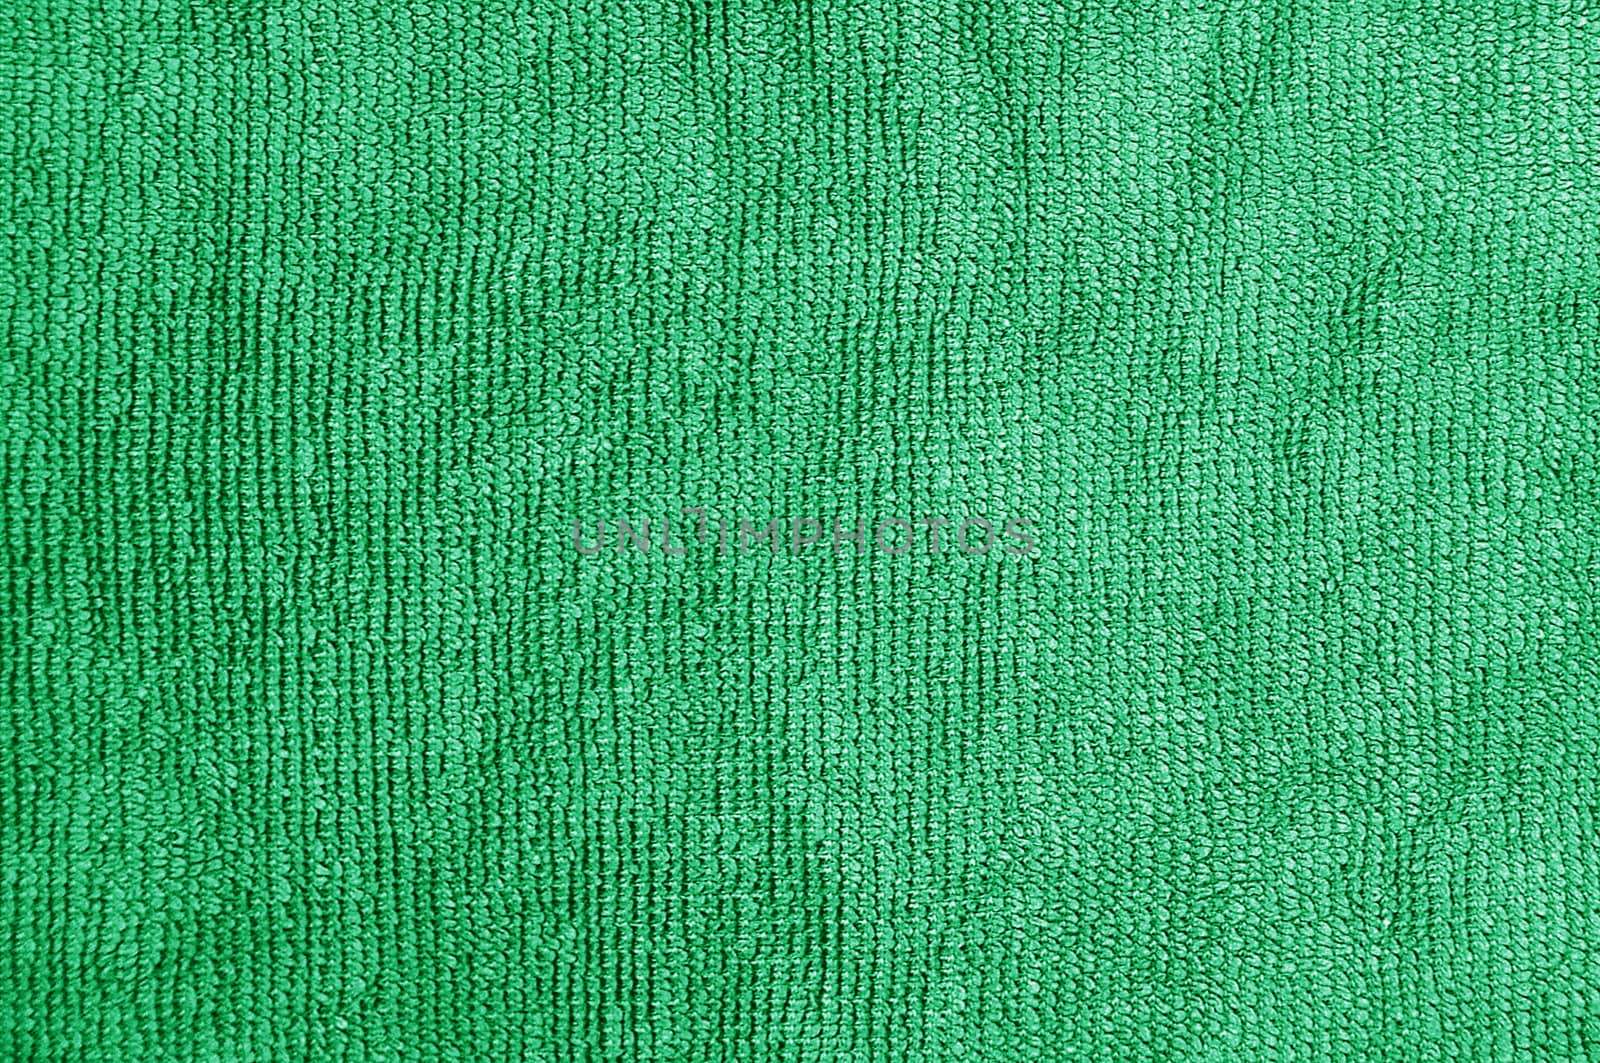 green towel texture, vibrant colors and strong shading expanse